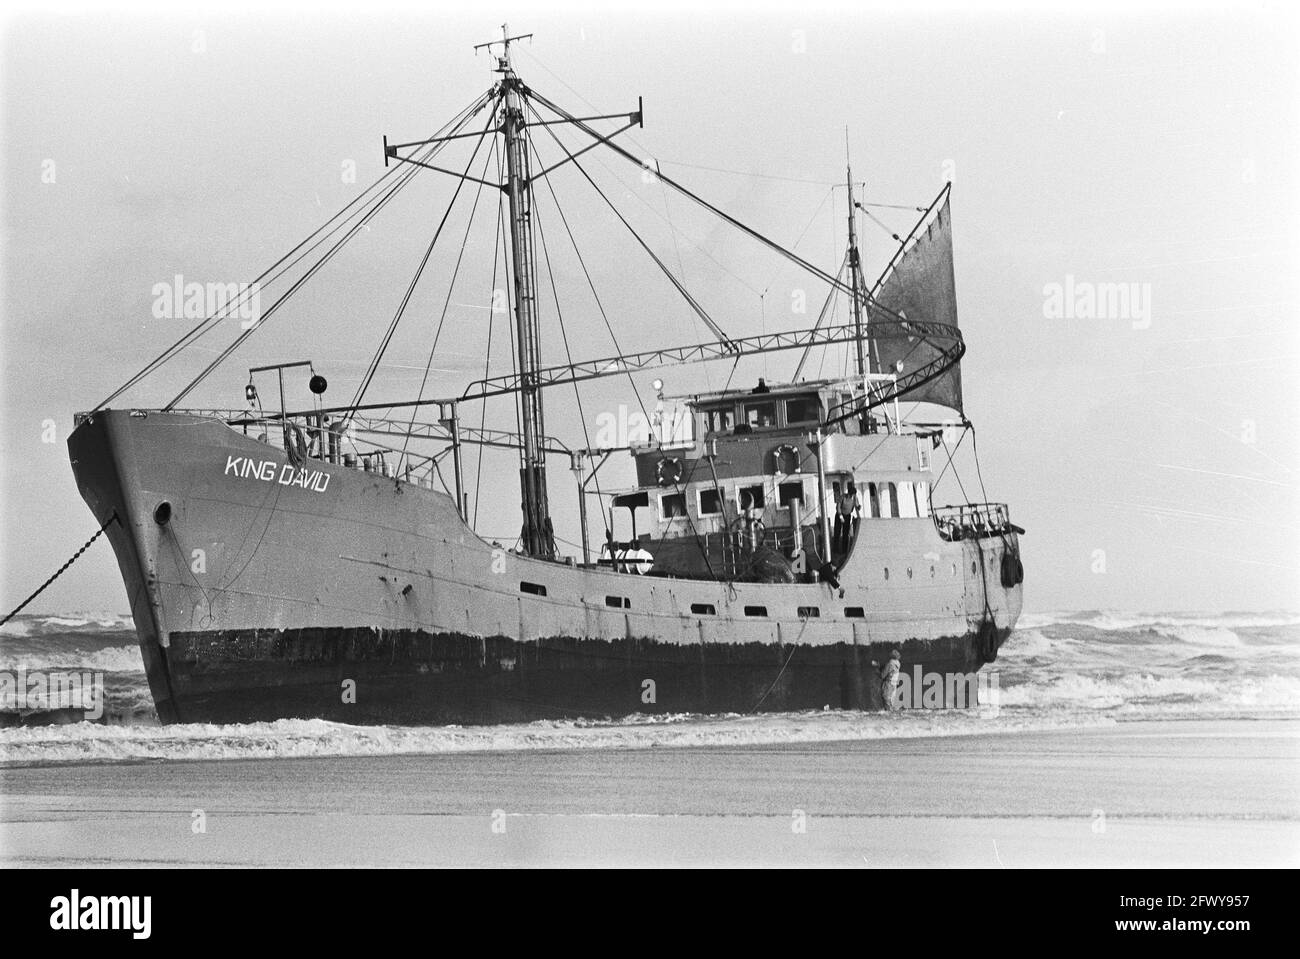 Stranded ships Black and White Stock Photos & Images - Alamy